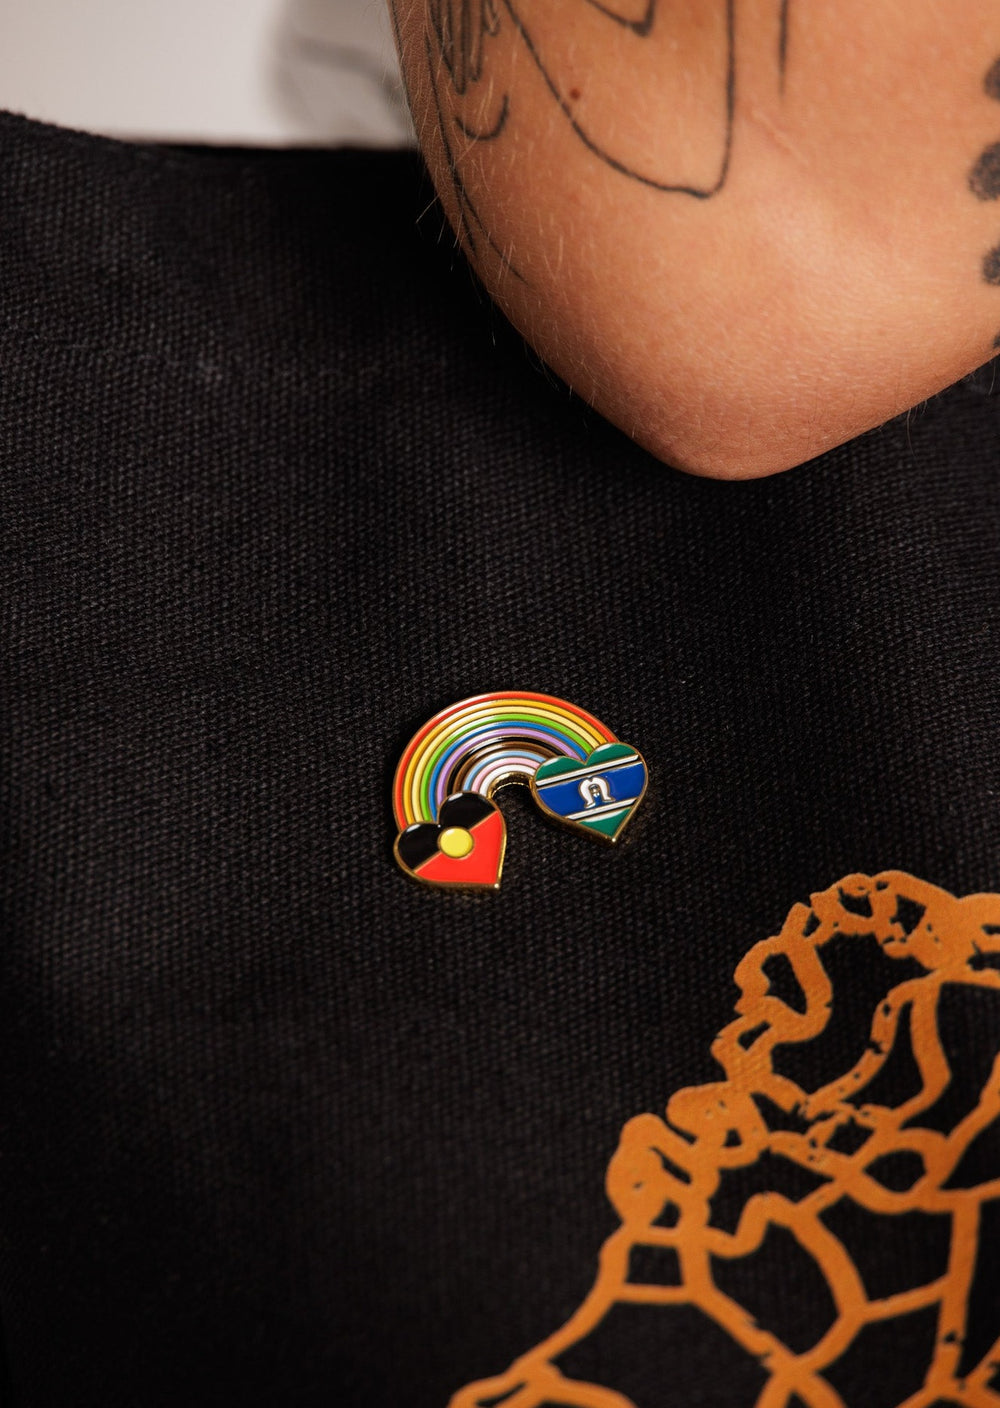 Clothing The Gaps. Rainbow Mob pin. Pin with Aboriginal flag in love heart shape at the start of a rainbow and at the end of the rainbow the Torres Strait Islander flag in love heart shape. The rainbow includes the colours from the progress pride flag. Show your pride or support for First Nations LGBTQIAS&B+ Community.